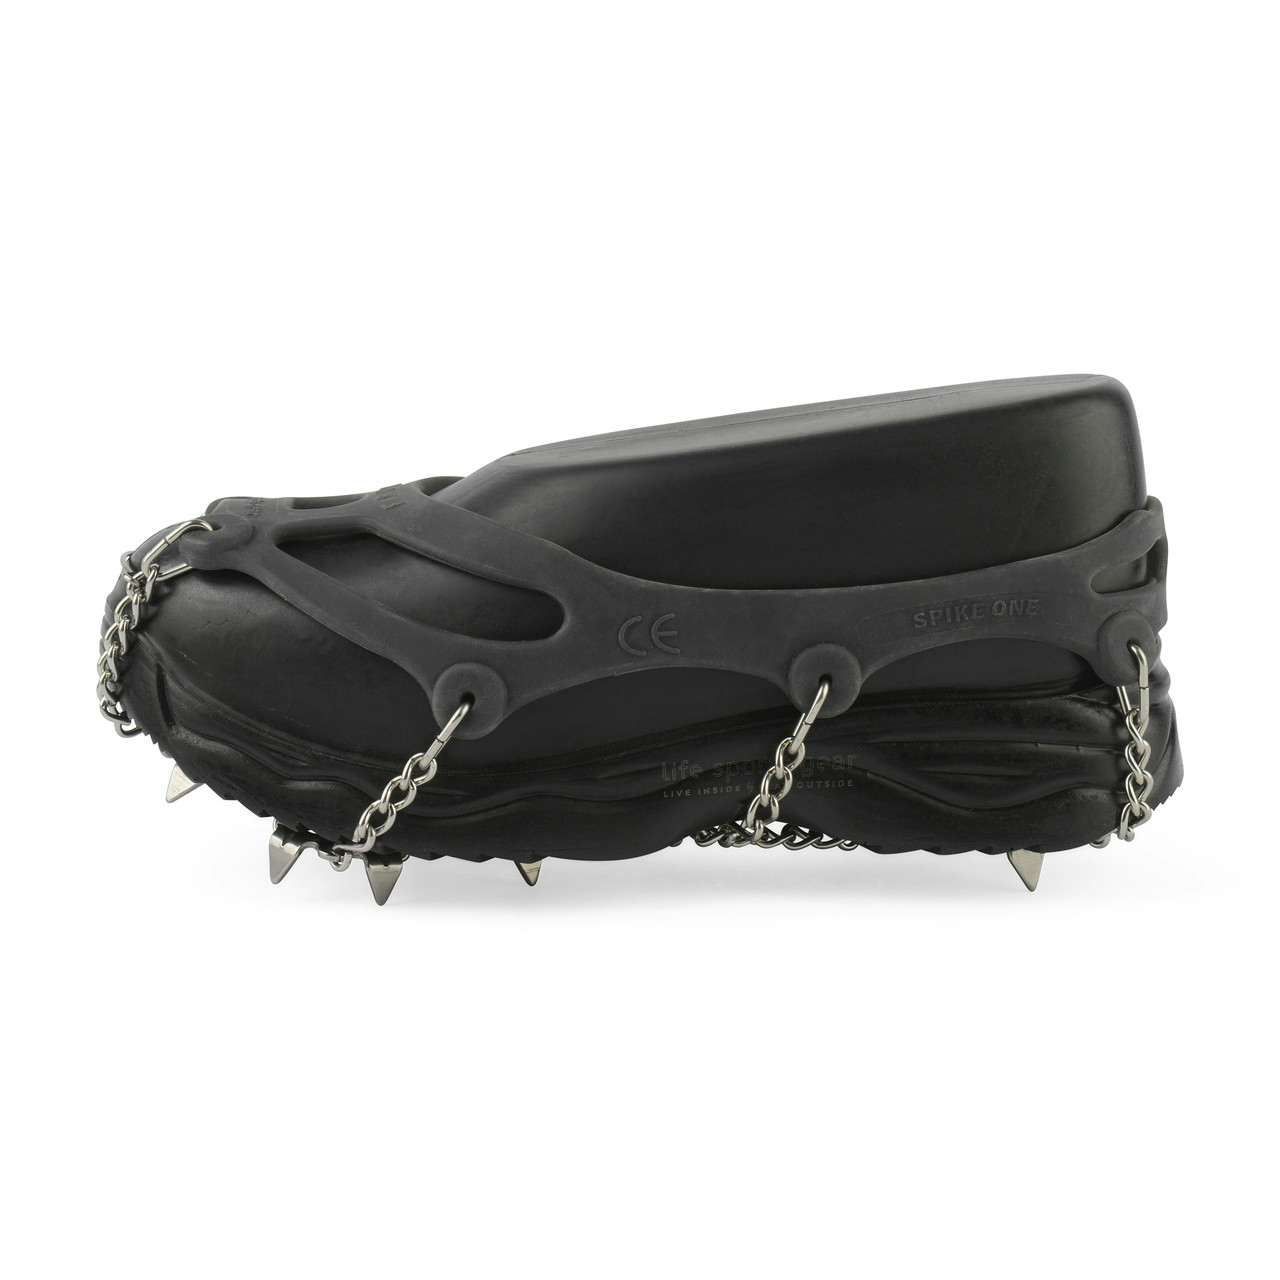 Crampons d'appoint Spike One Noir